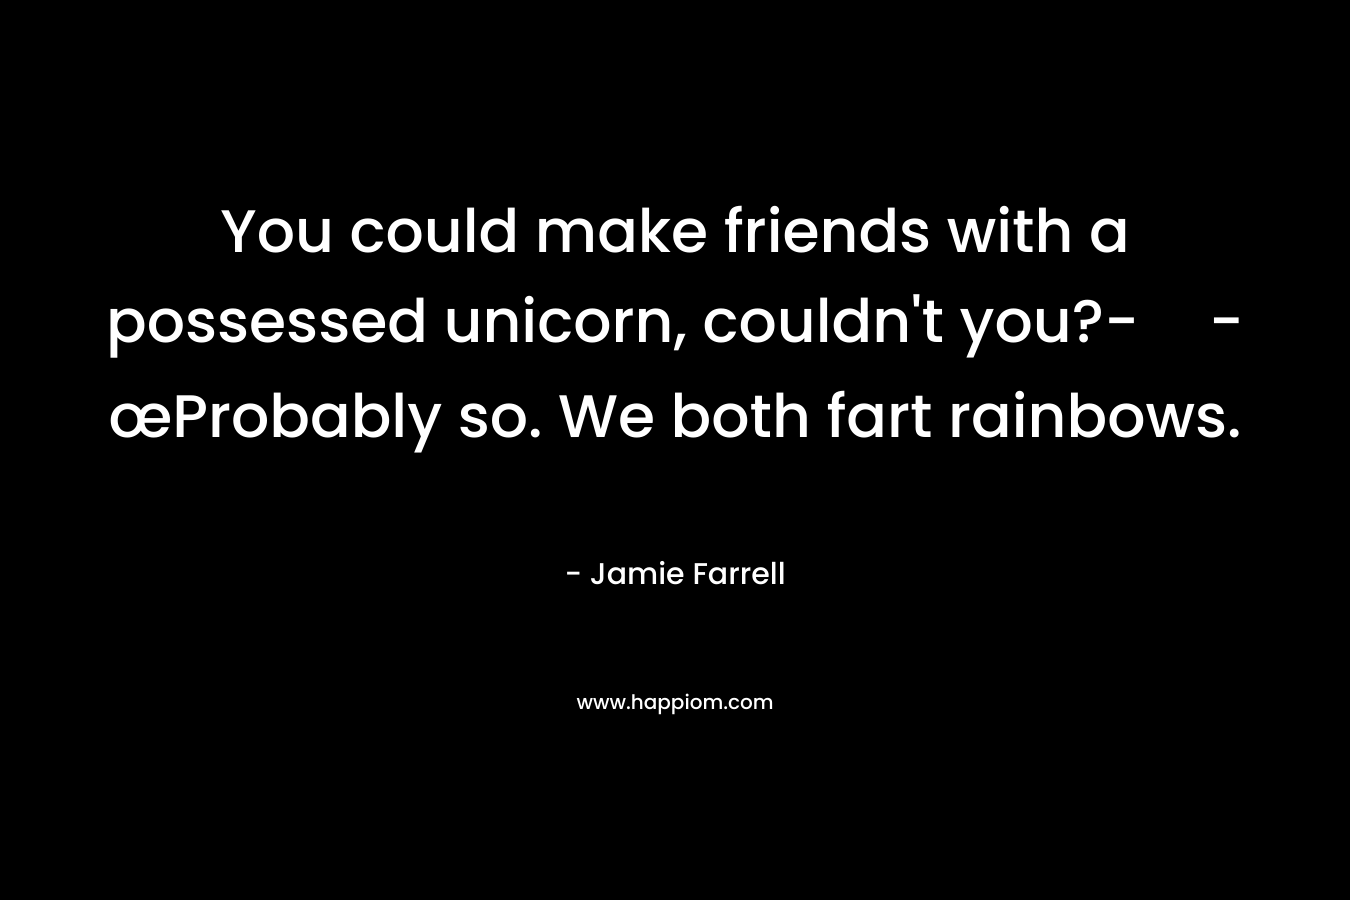 You could make friends with a possessed unicorn, couldn’t you?--œProbably so. We both fart rainbows. – Jamie Farrell